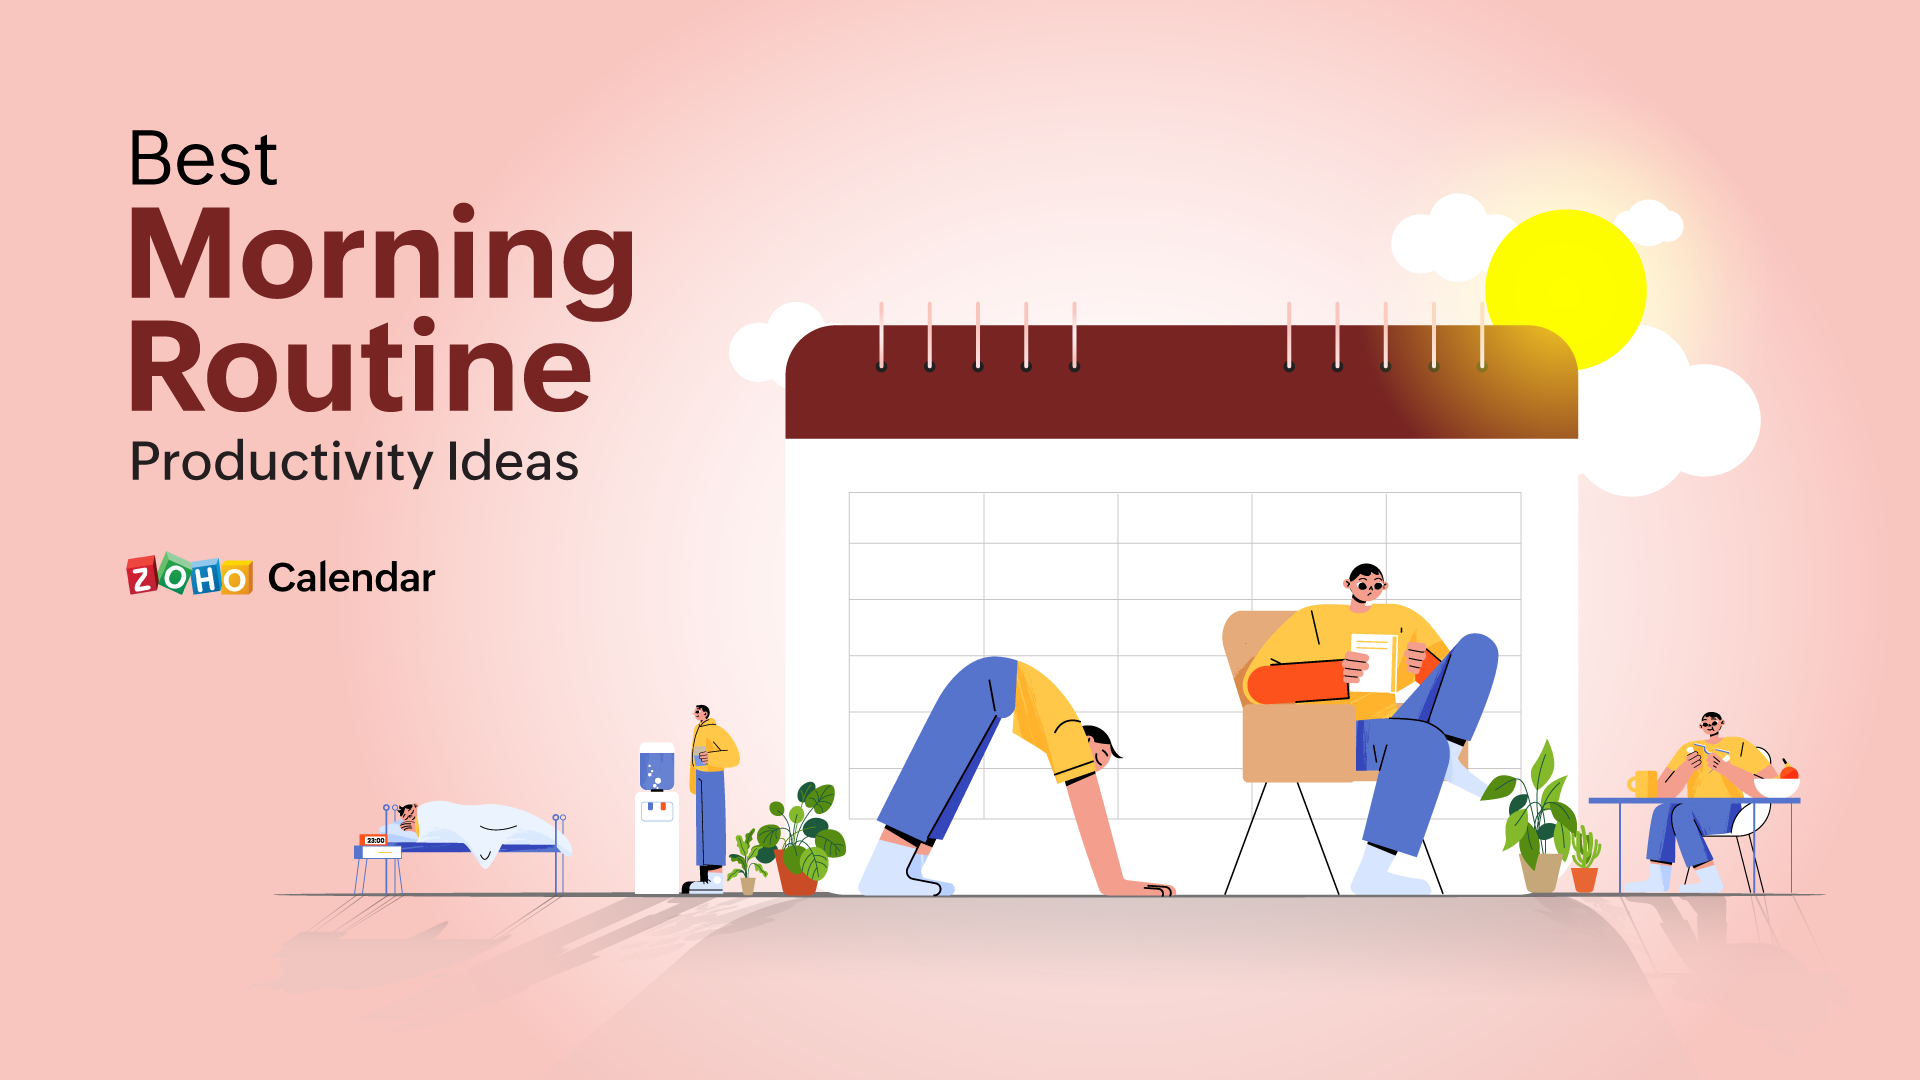 Best Morning Routine Productivity Ideas